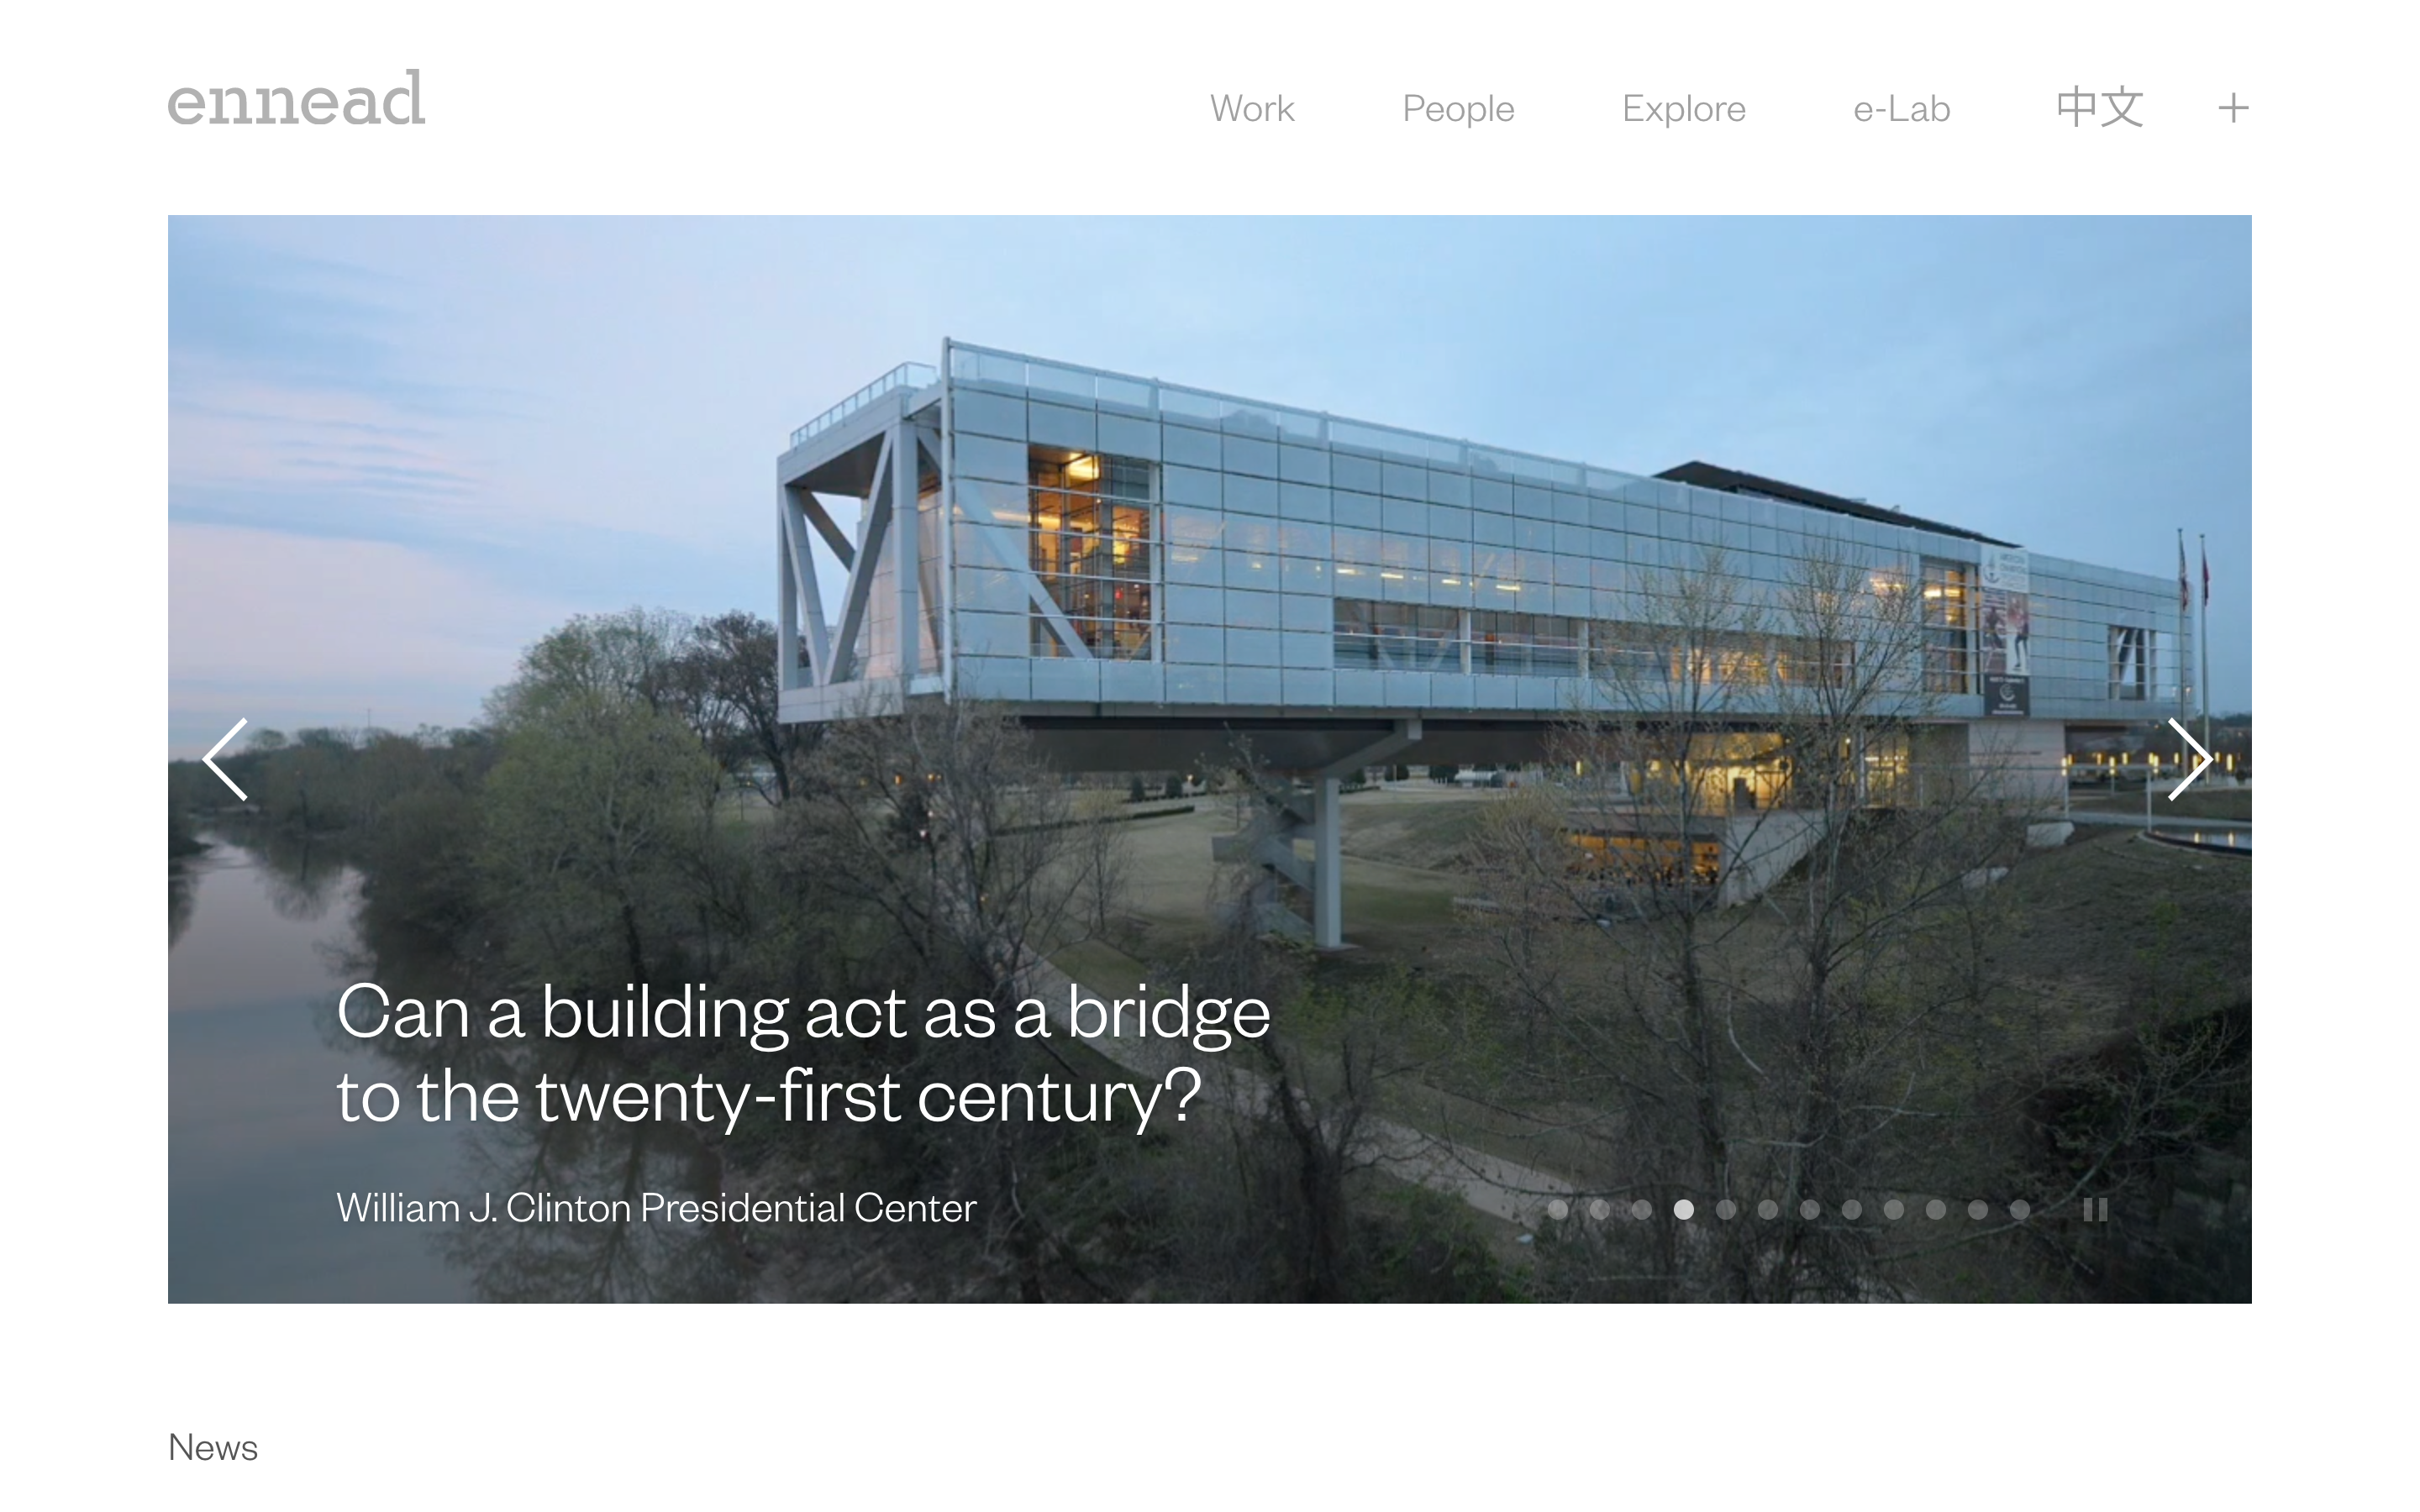  Ennead Architects Website: Featured Work 1, Carousel